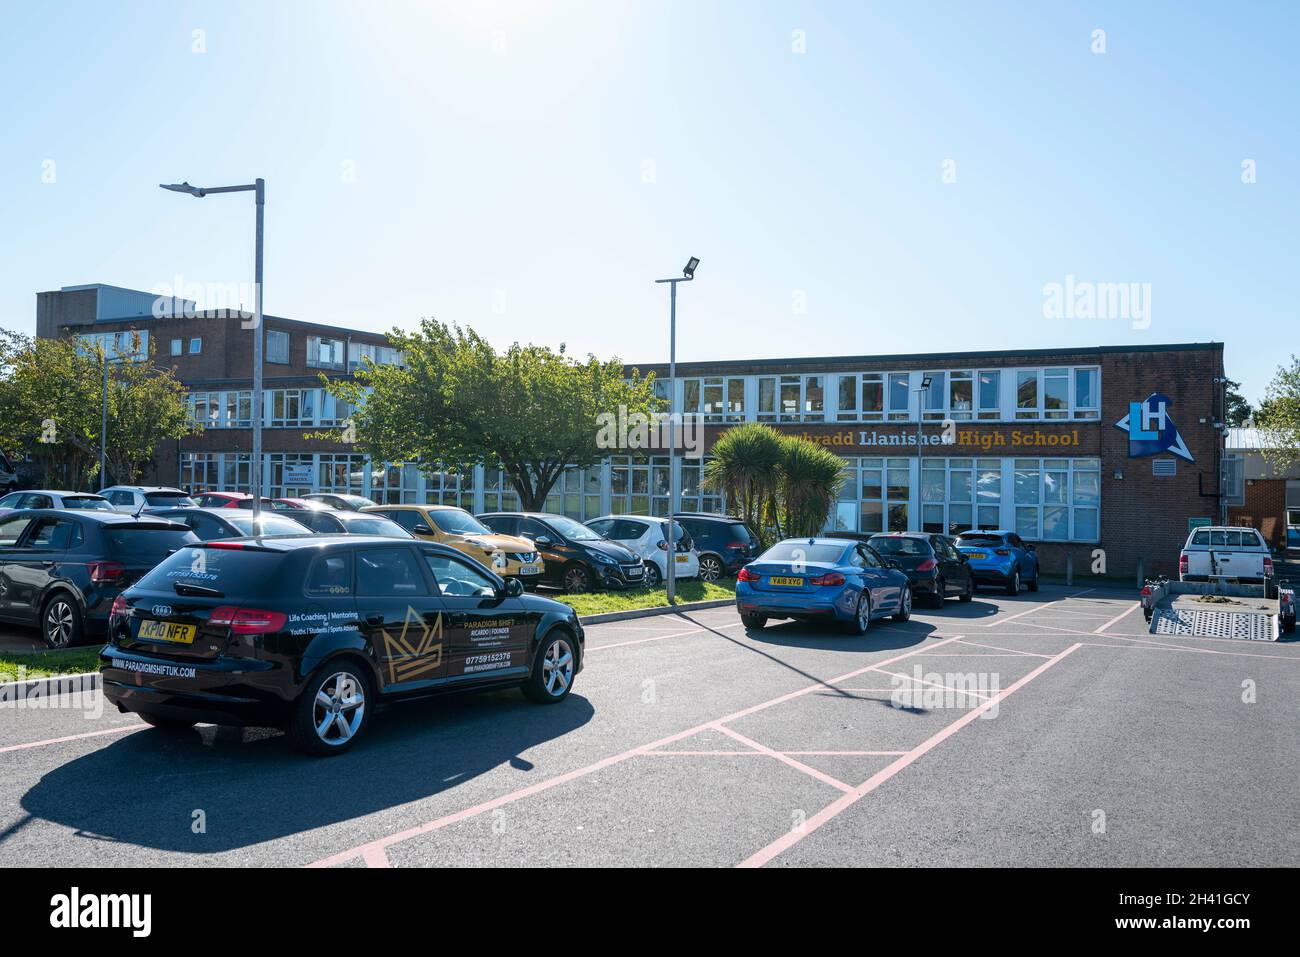 A general view of Llanishen High School in Cardiff, Wales, United Kingdom. Stock Photo